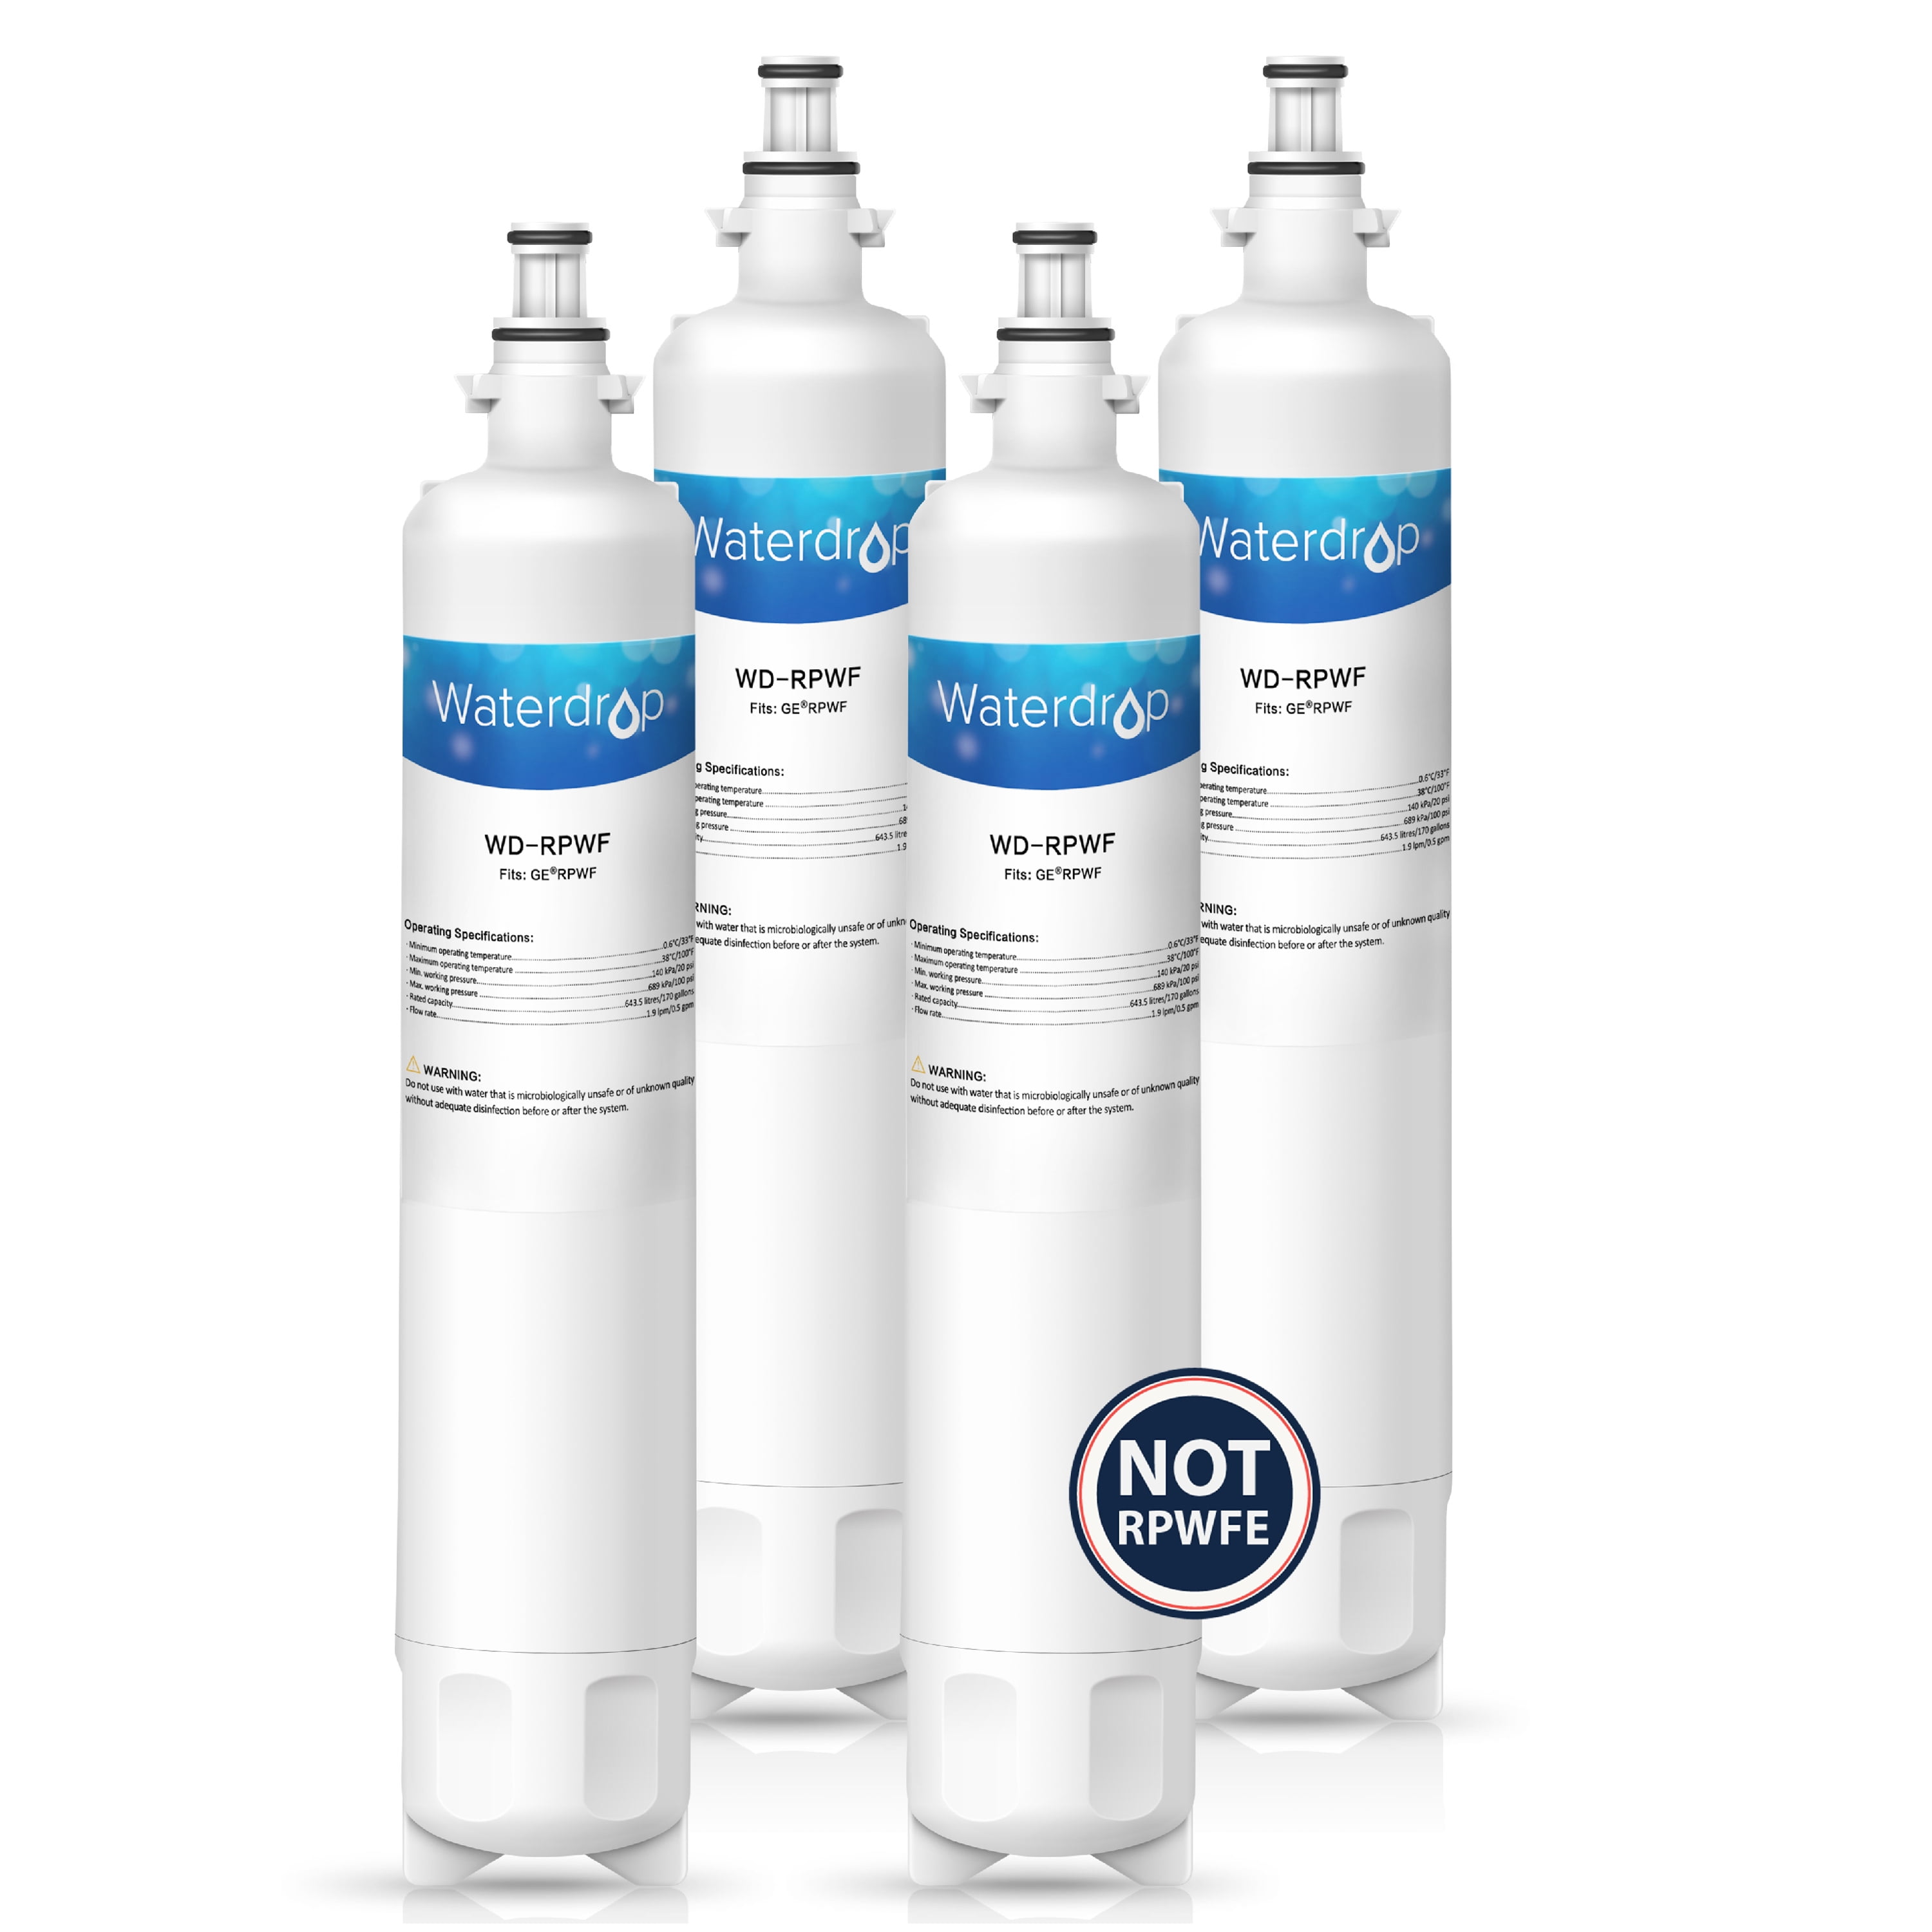 Compatible with GE RPWF Waterdrop NSF 53&42 Certified Refrigerator Water Filter Advanced WDS-RPWF Not RPWFE